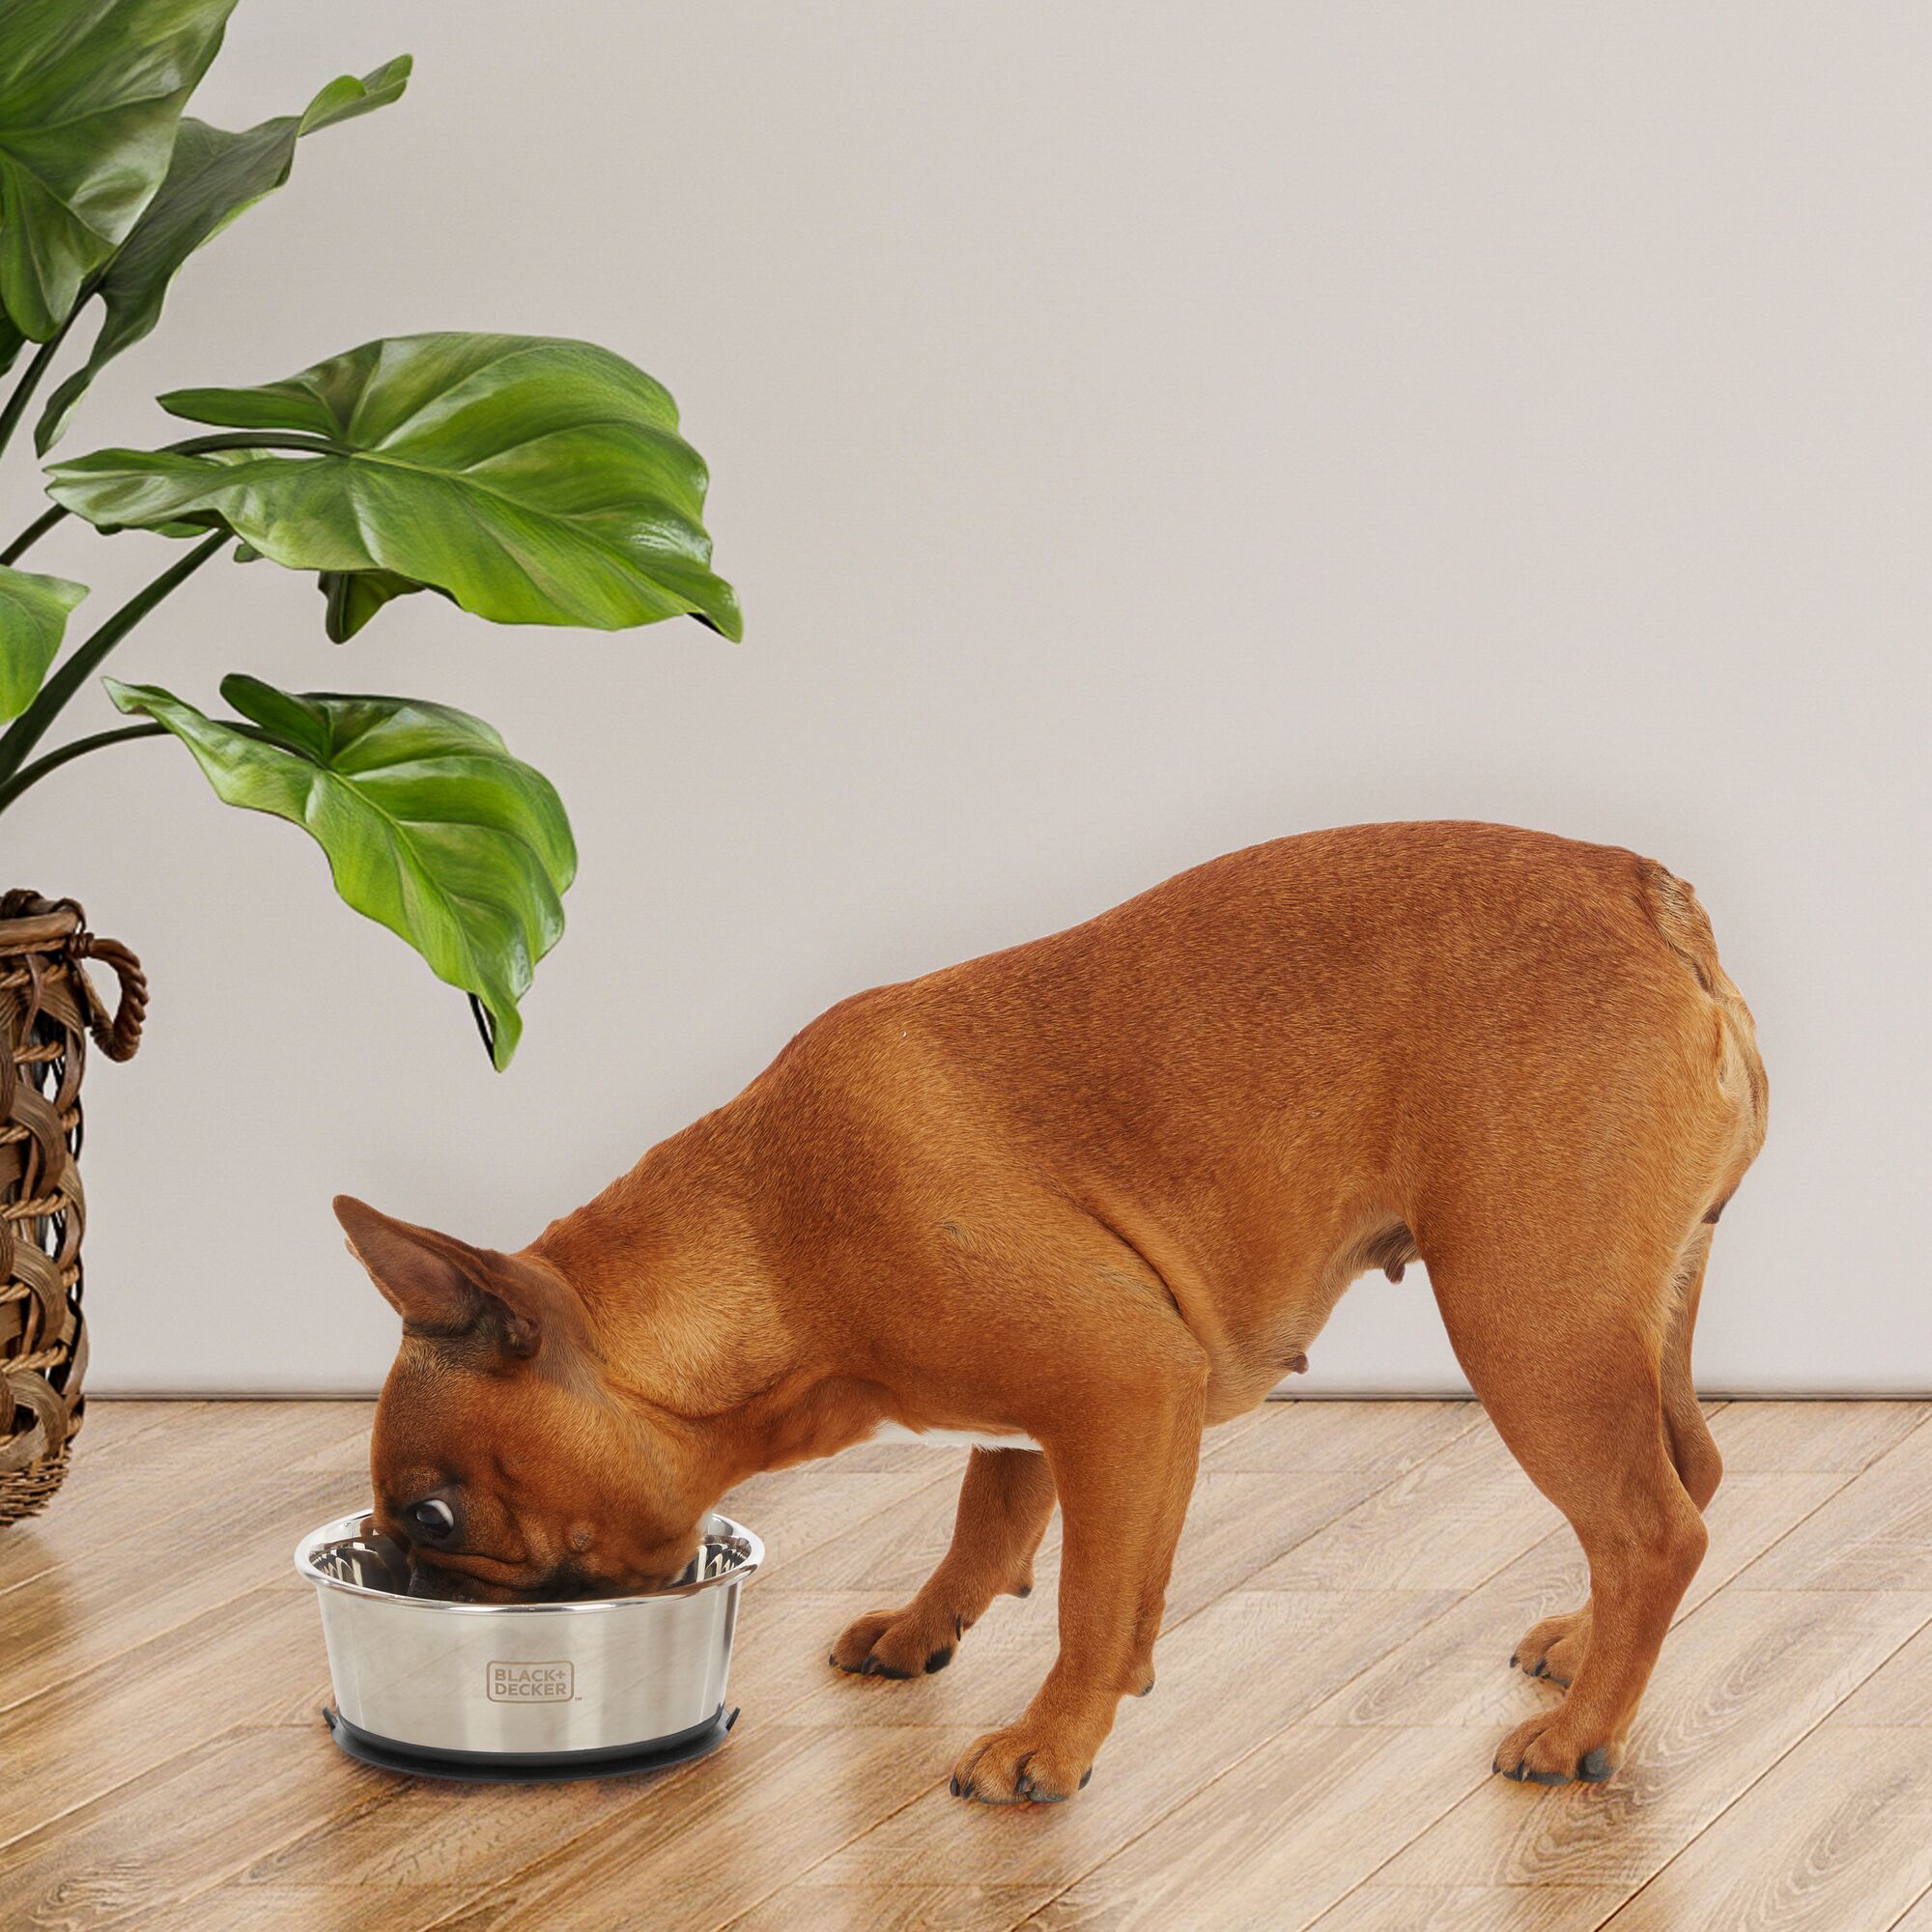 Brown Frenchie eating from silver Black and Decker suction cup dog bowl next to floor plant